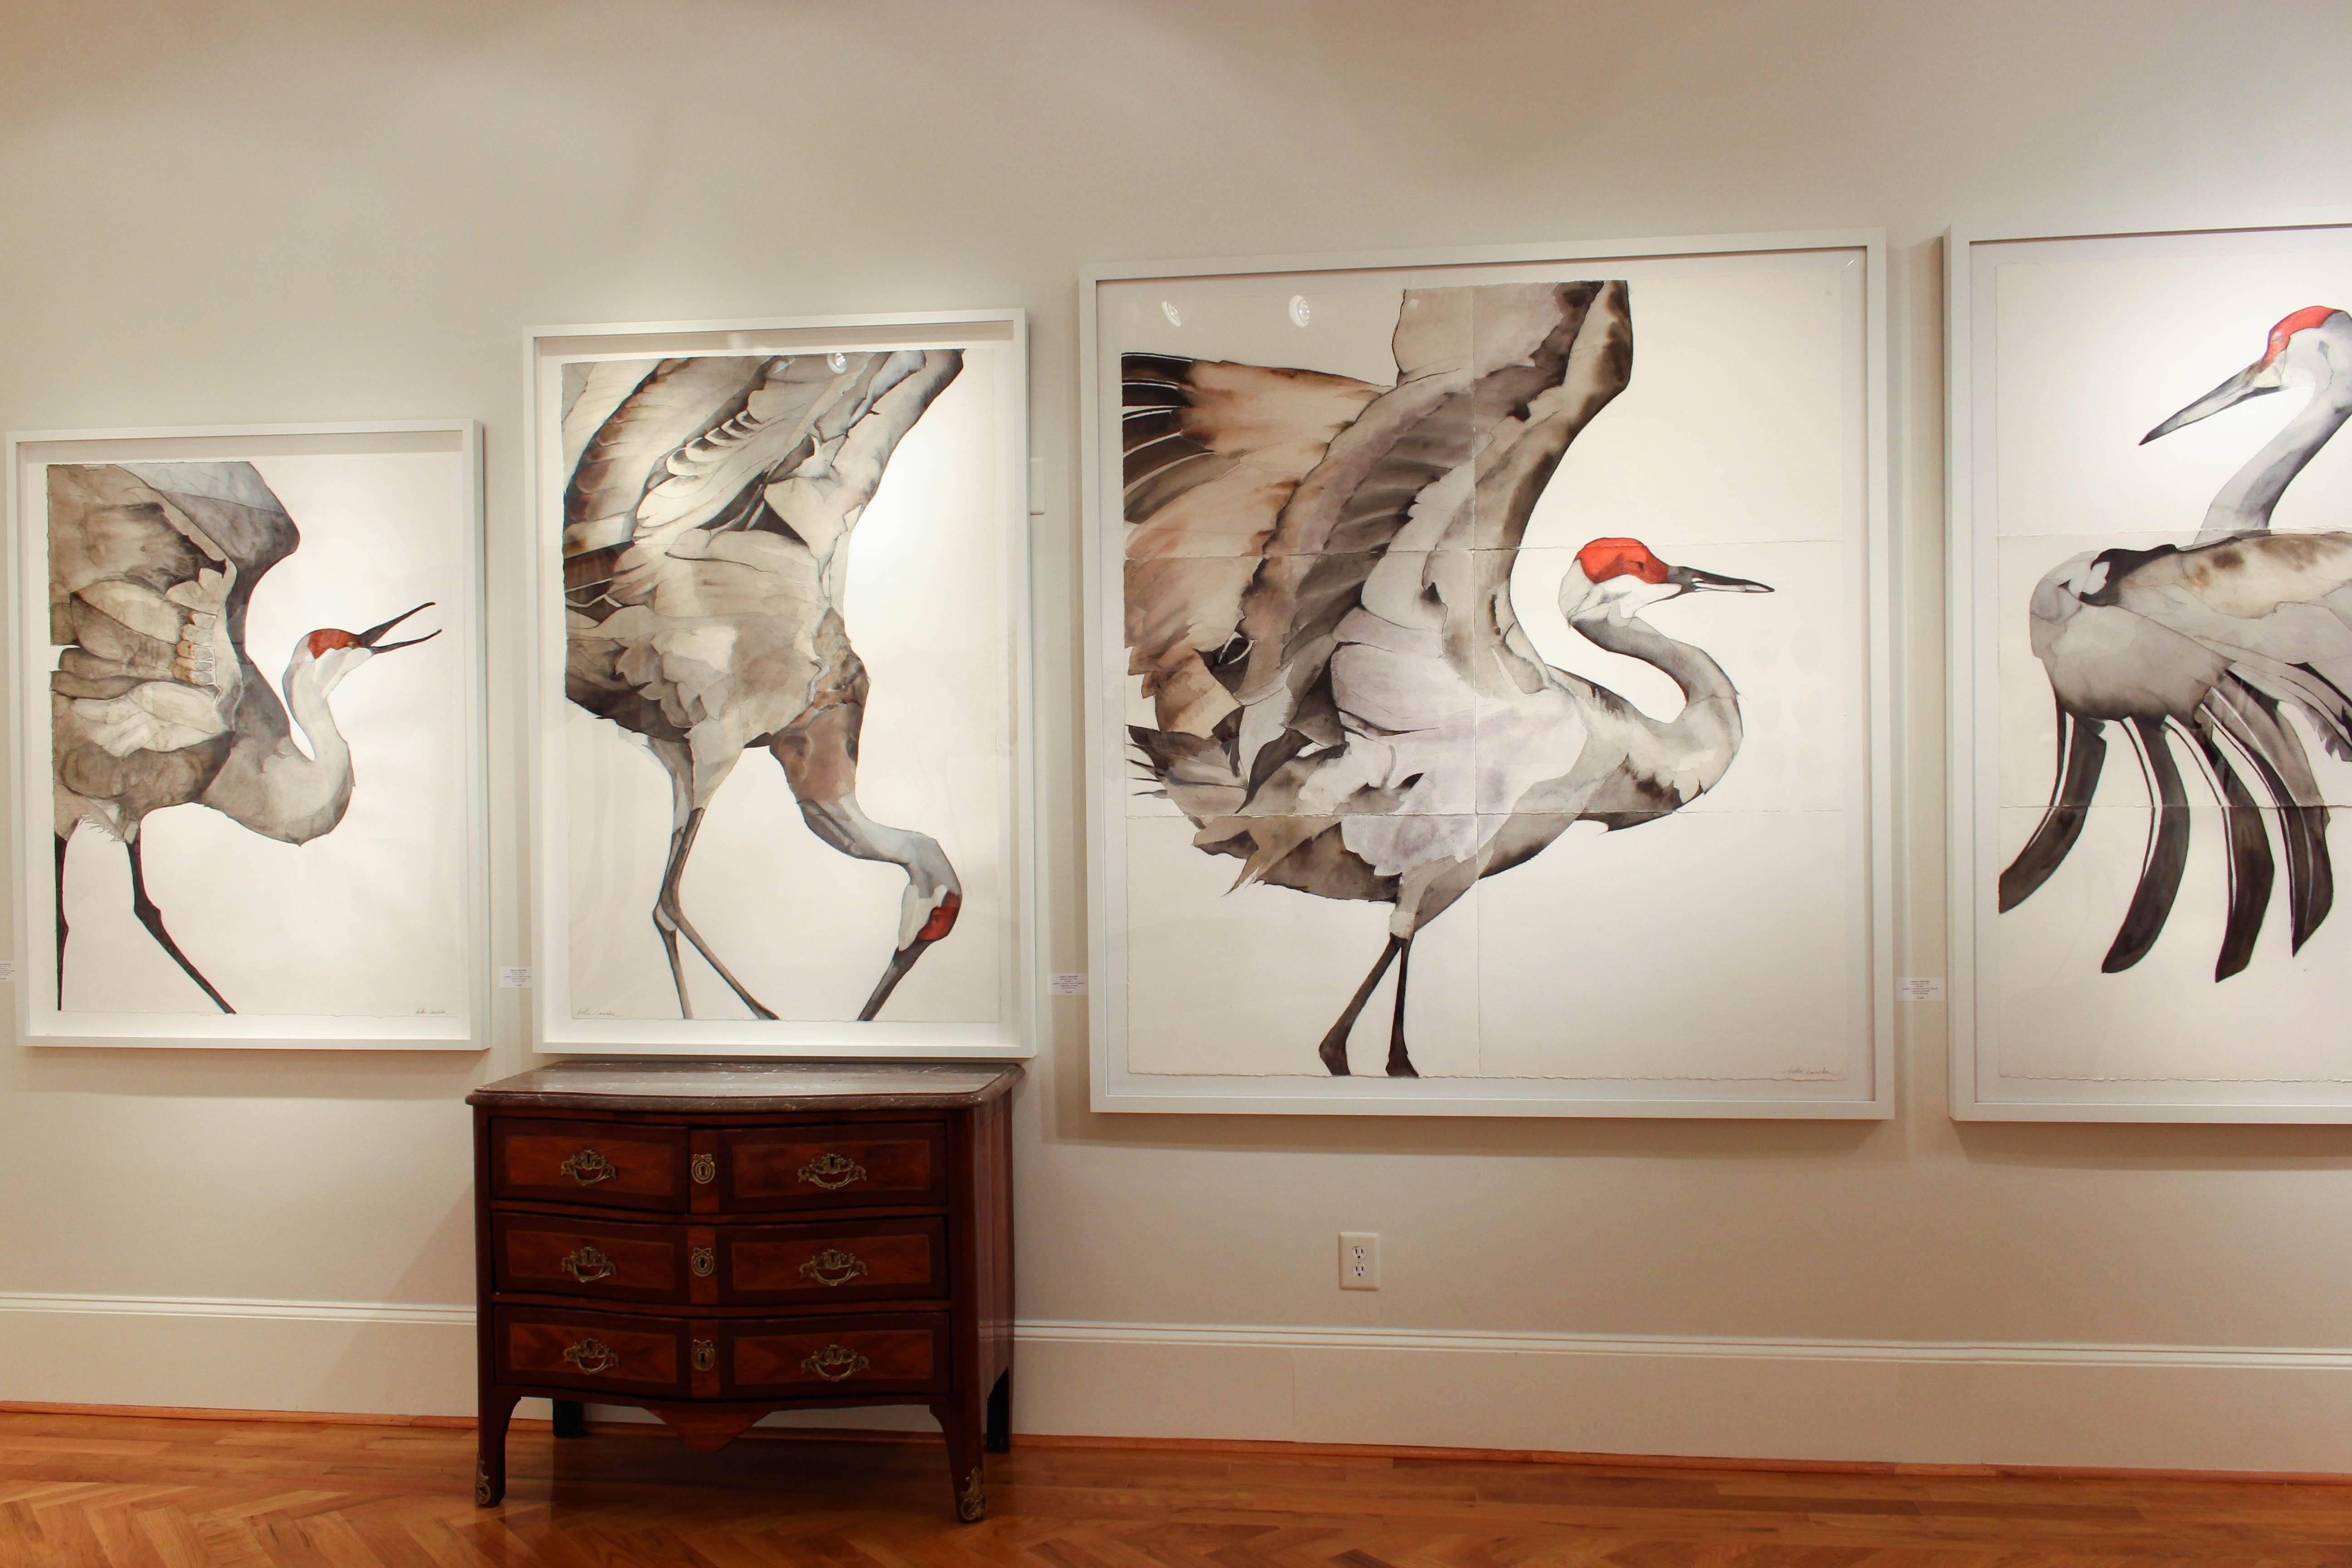 In this work on paper, “Allongé II,” Heather Lancaster uses delicate charcoal & graphite drawing with subtle planar shifts & multiple layers of watercolor, India ink & sepia washes to form the exquisite figure of a sandhill crane. The